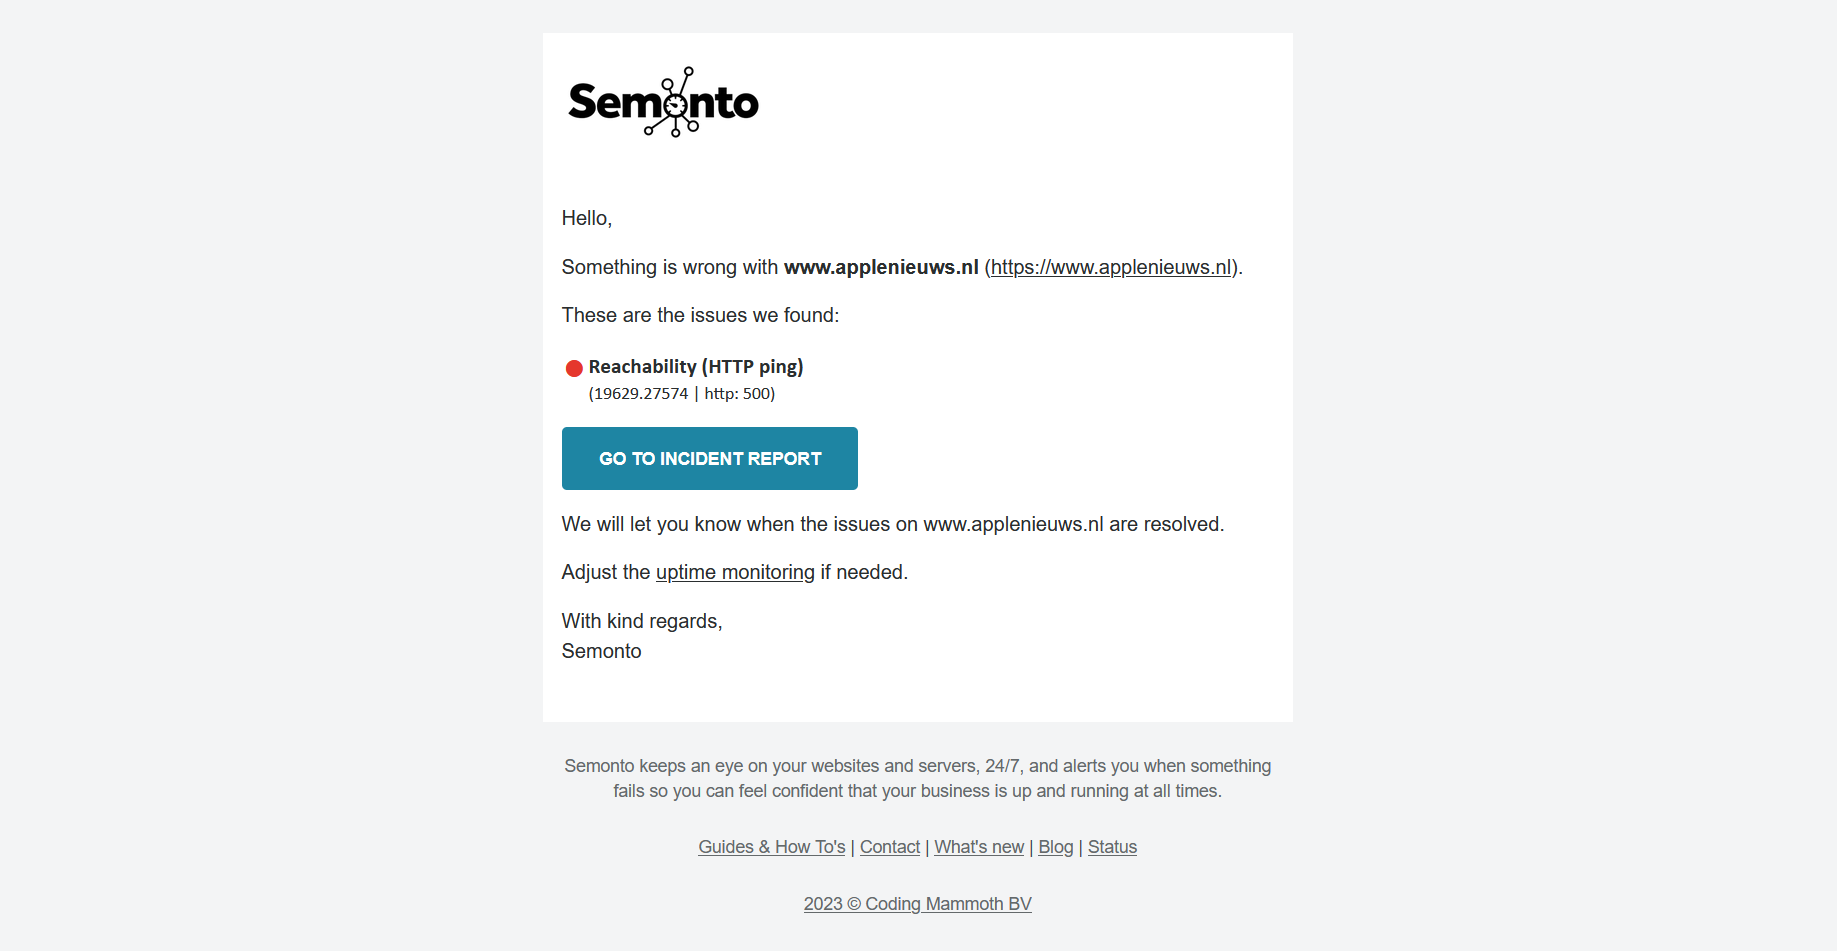 An email alert from Semonto